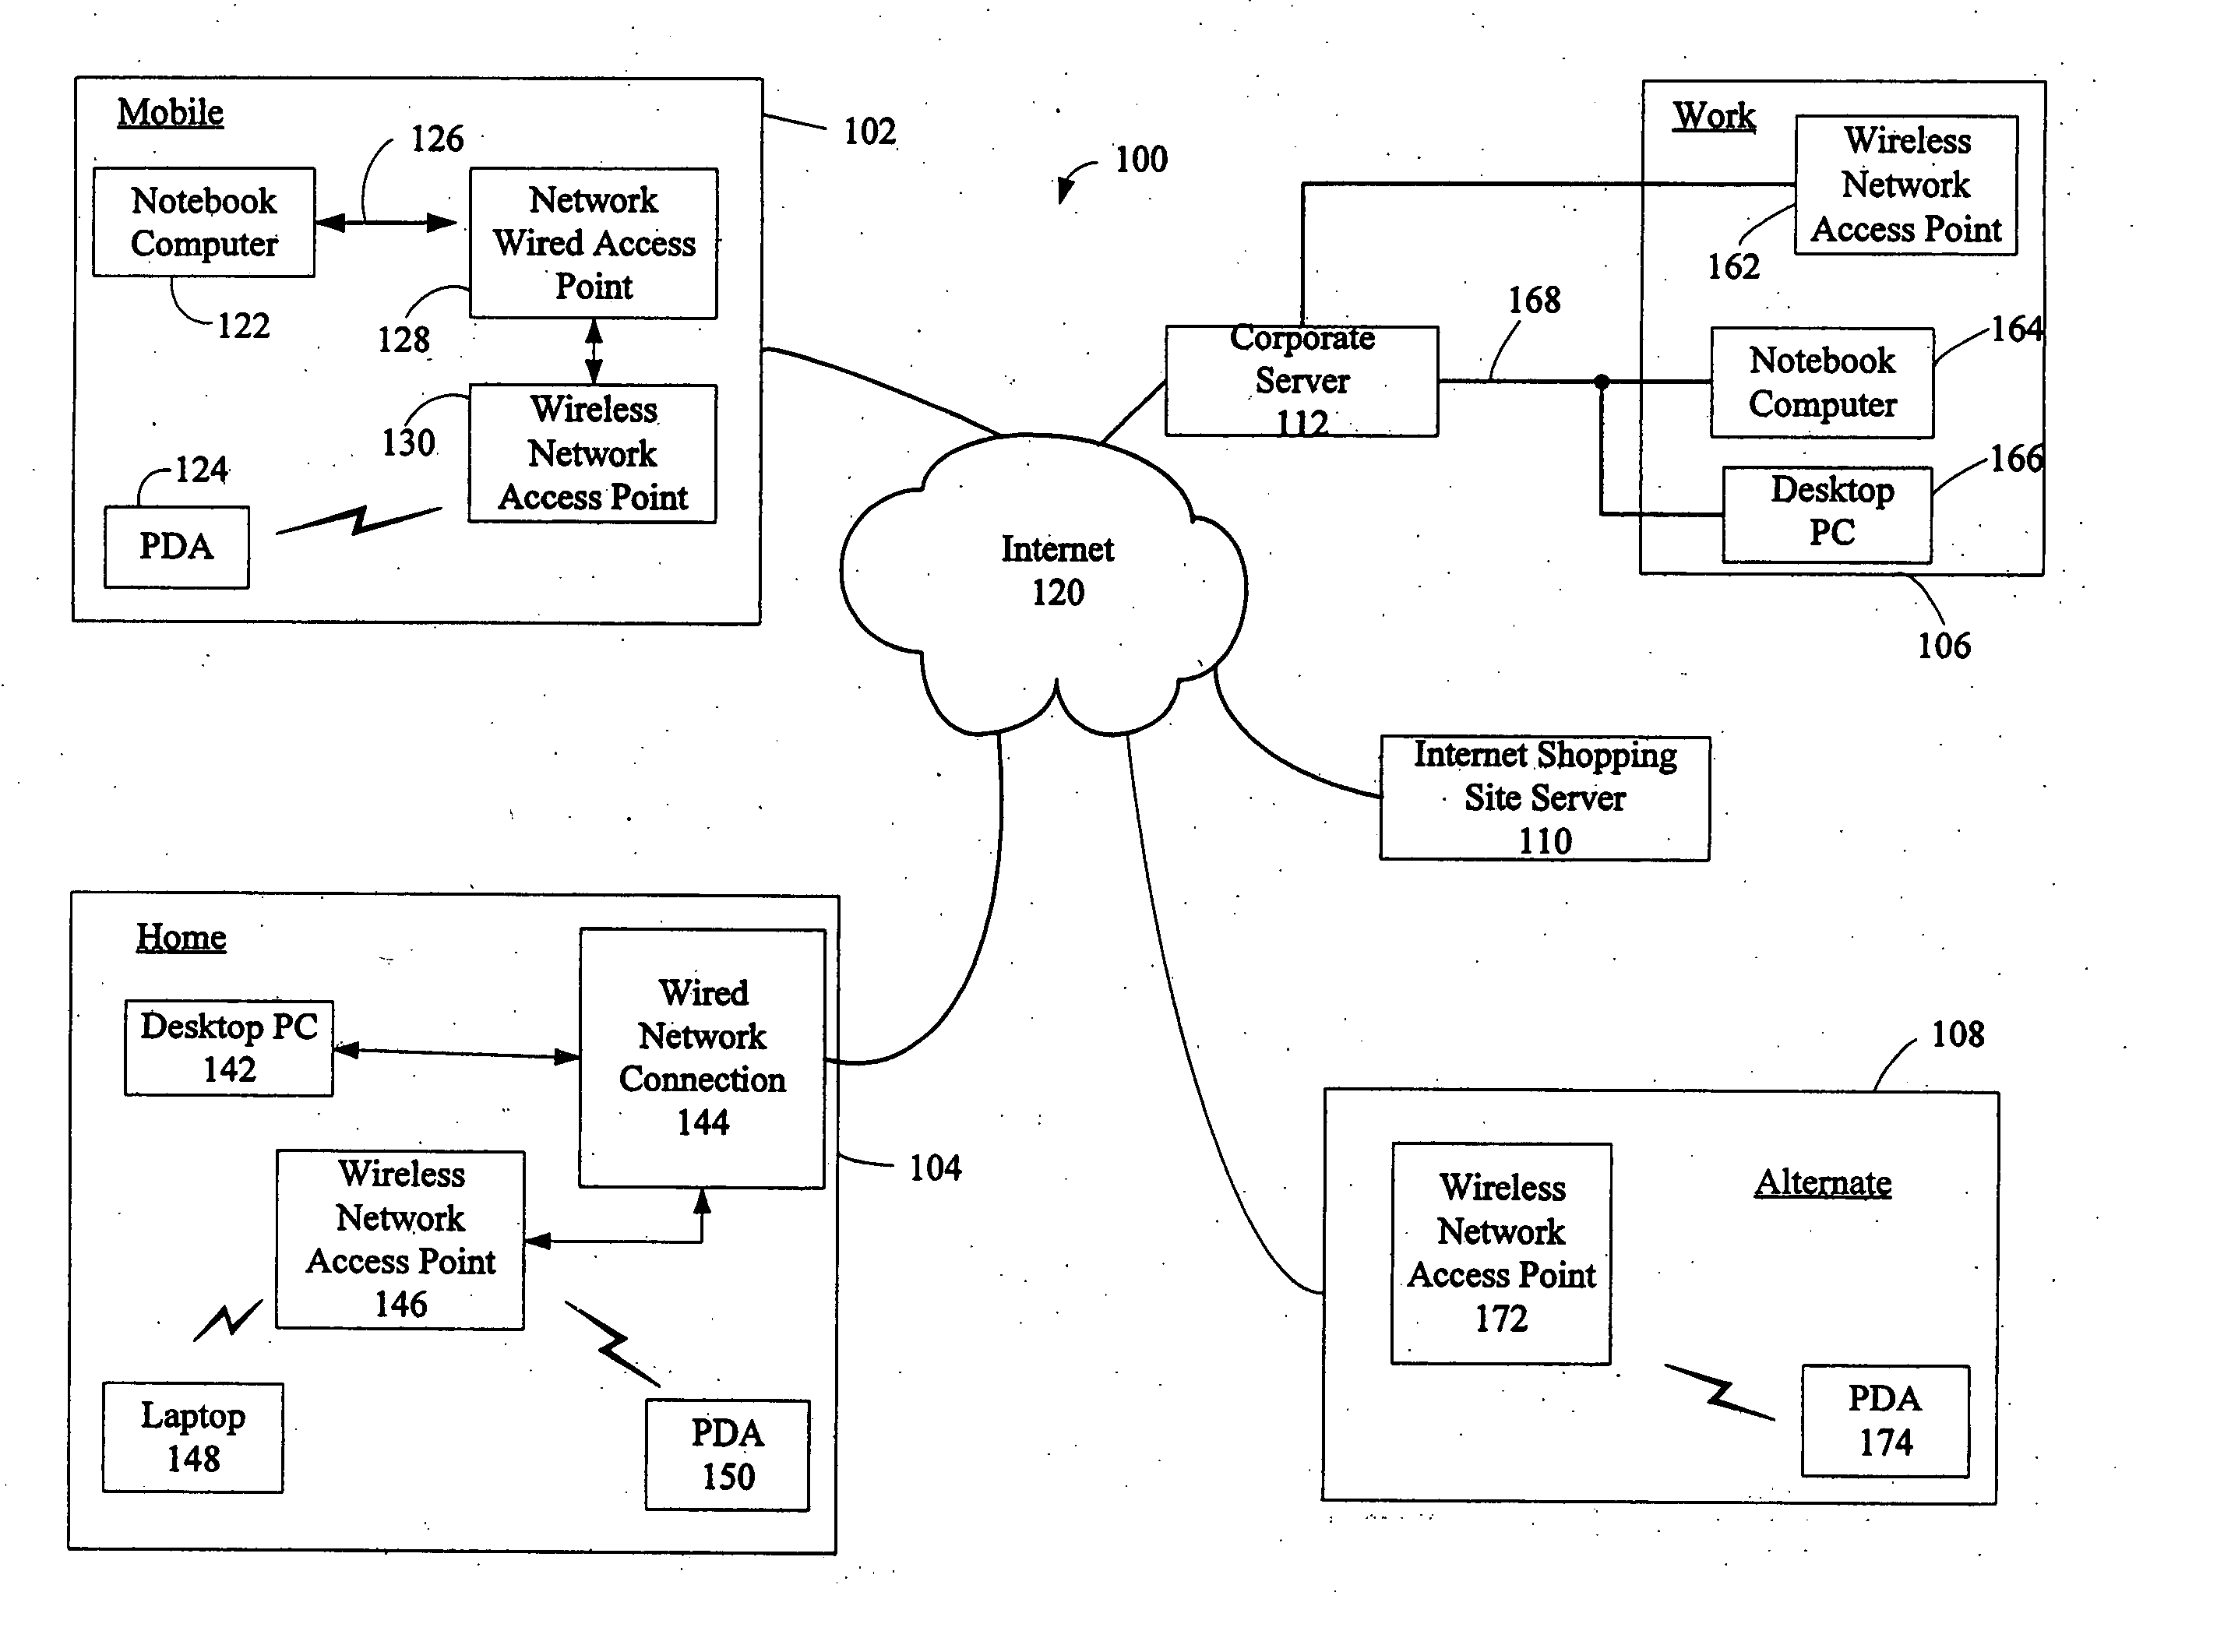 System and method for filtering access points presented to a user and locking onto an access point